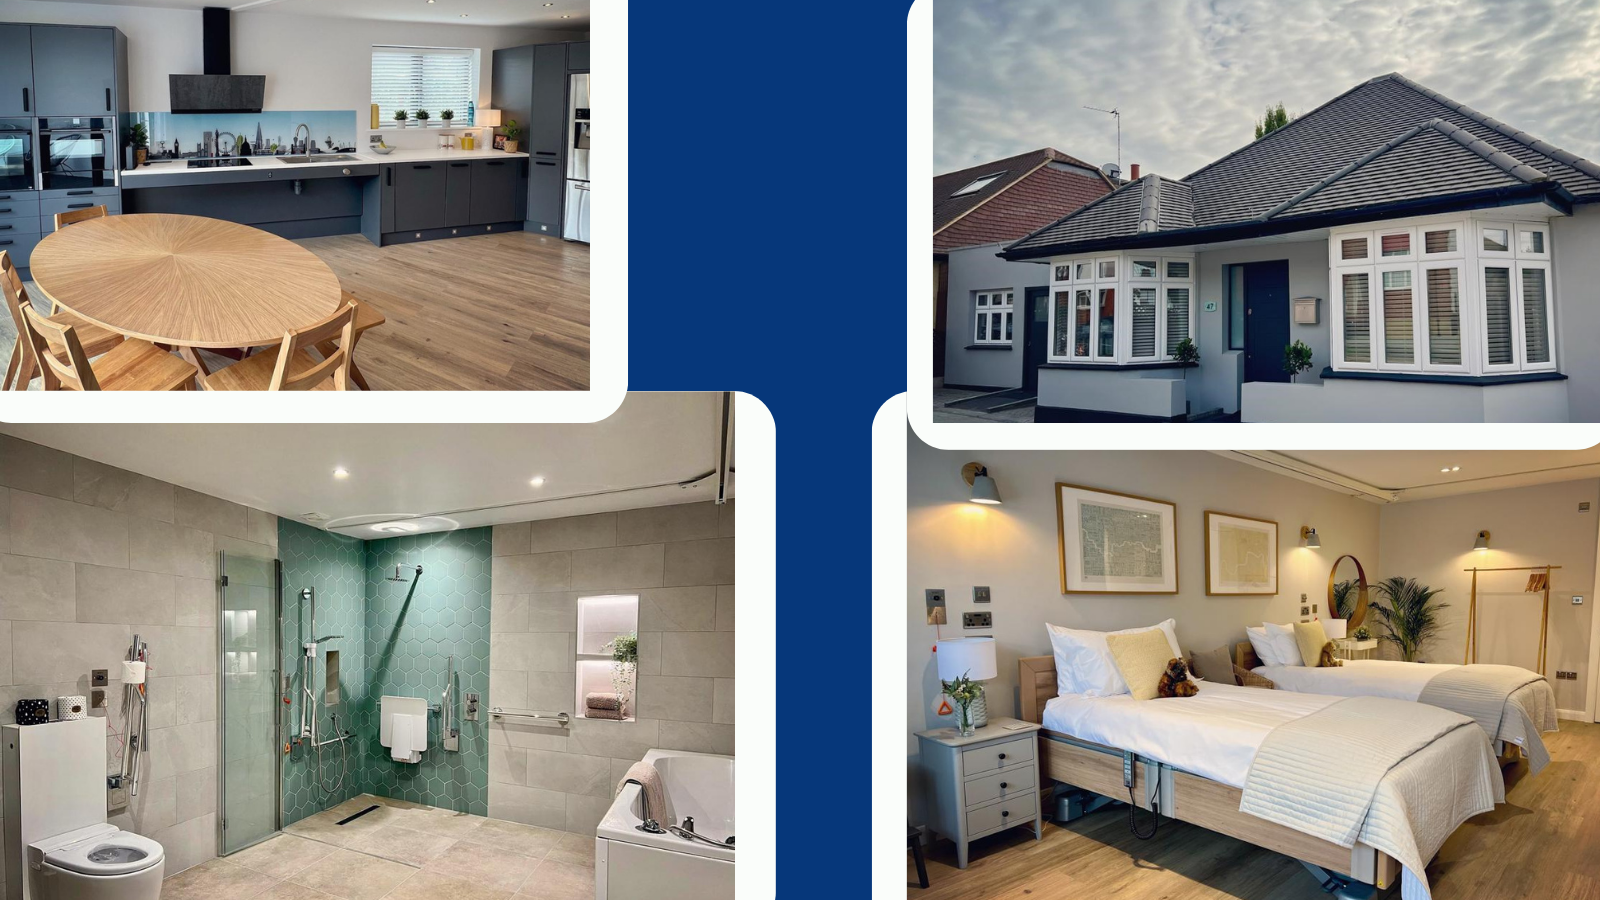 Four photos from AbleStay. The top left image is of the kitchen, which has lower worktops. The bottom left image is of a fully accessible bathroom and wetroom. The top right image is AbleStay's bungalow which is detached and modern. The bottom right image is of a bedroom with twin profiling beds. 